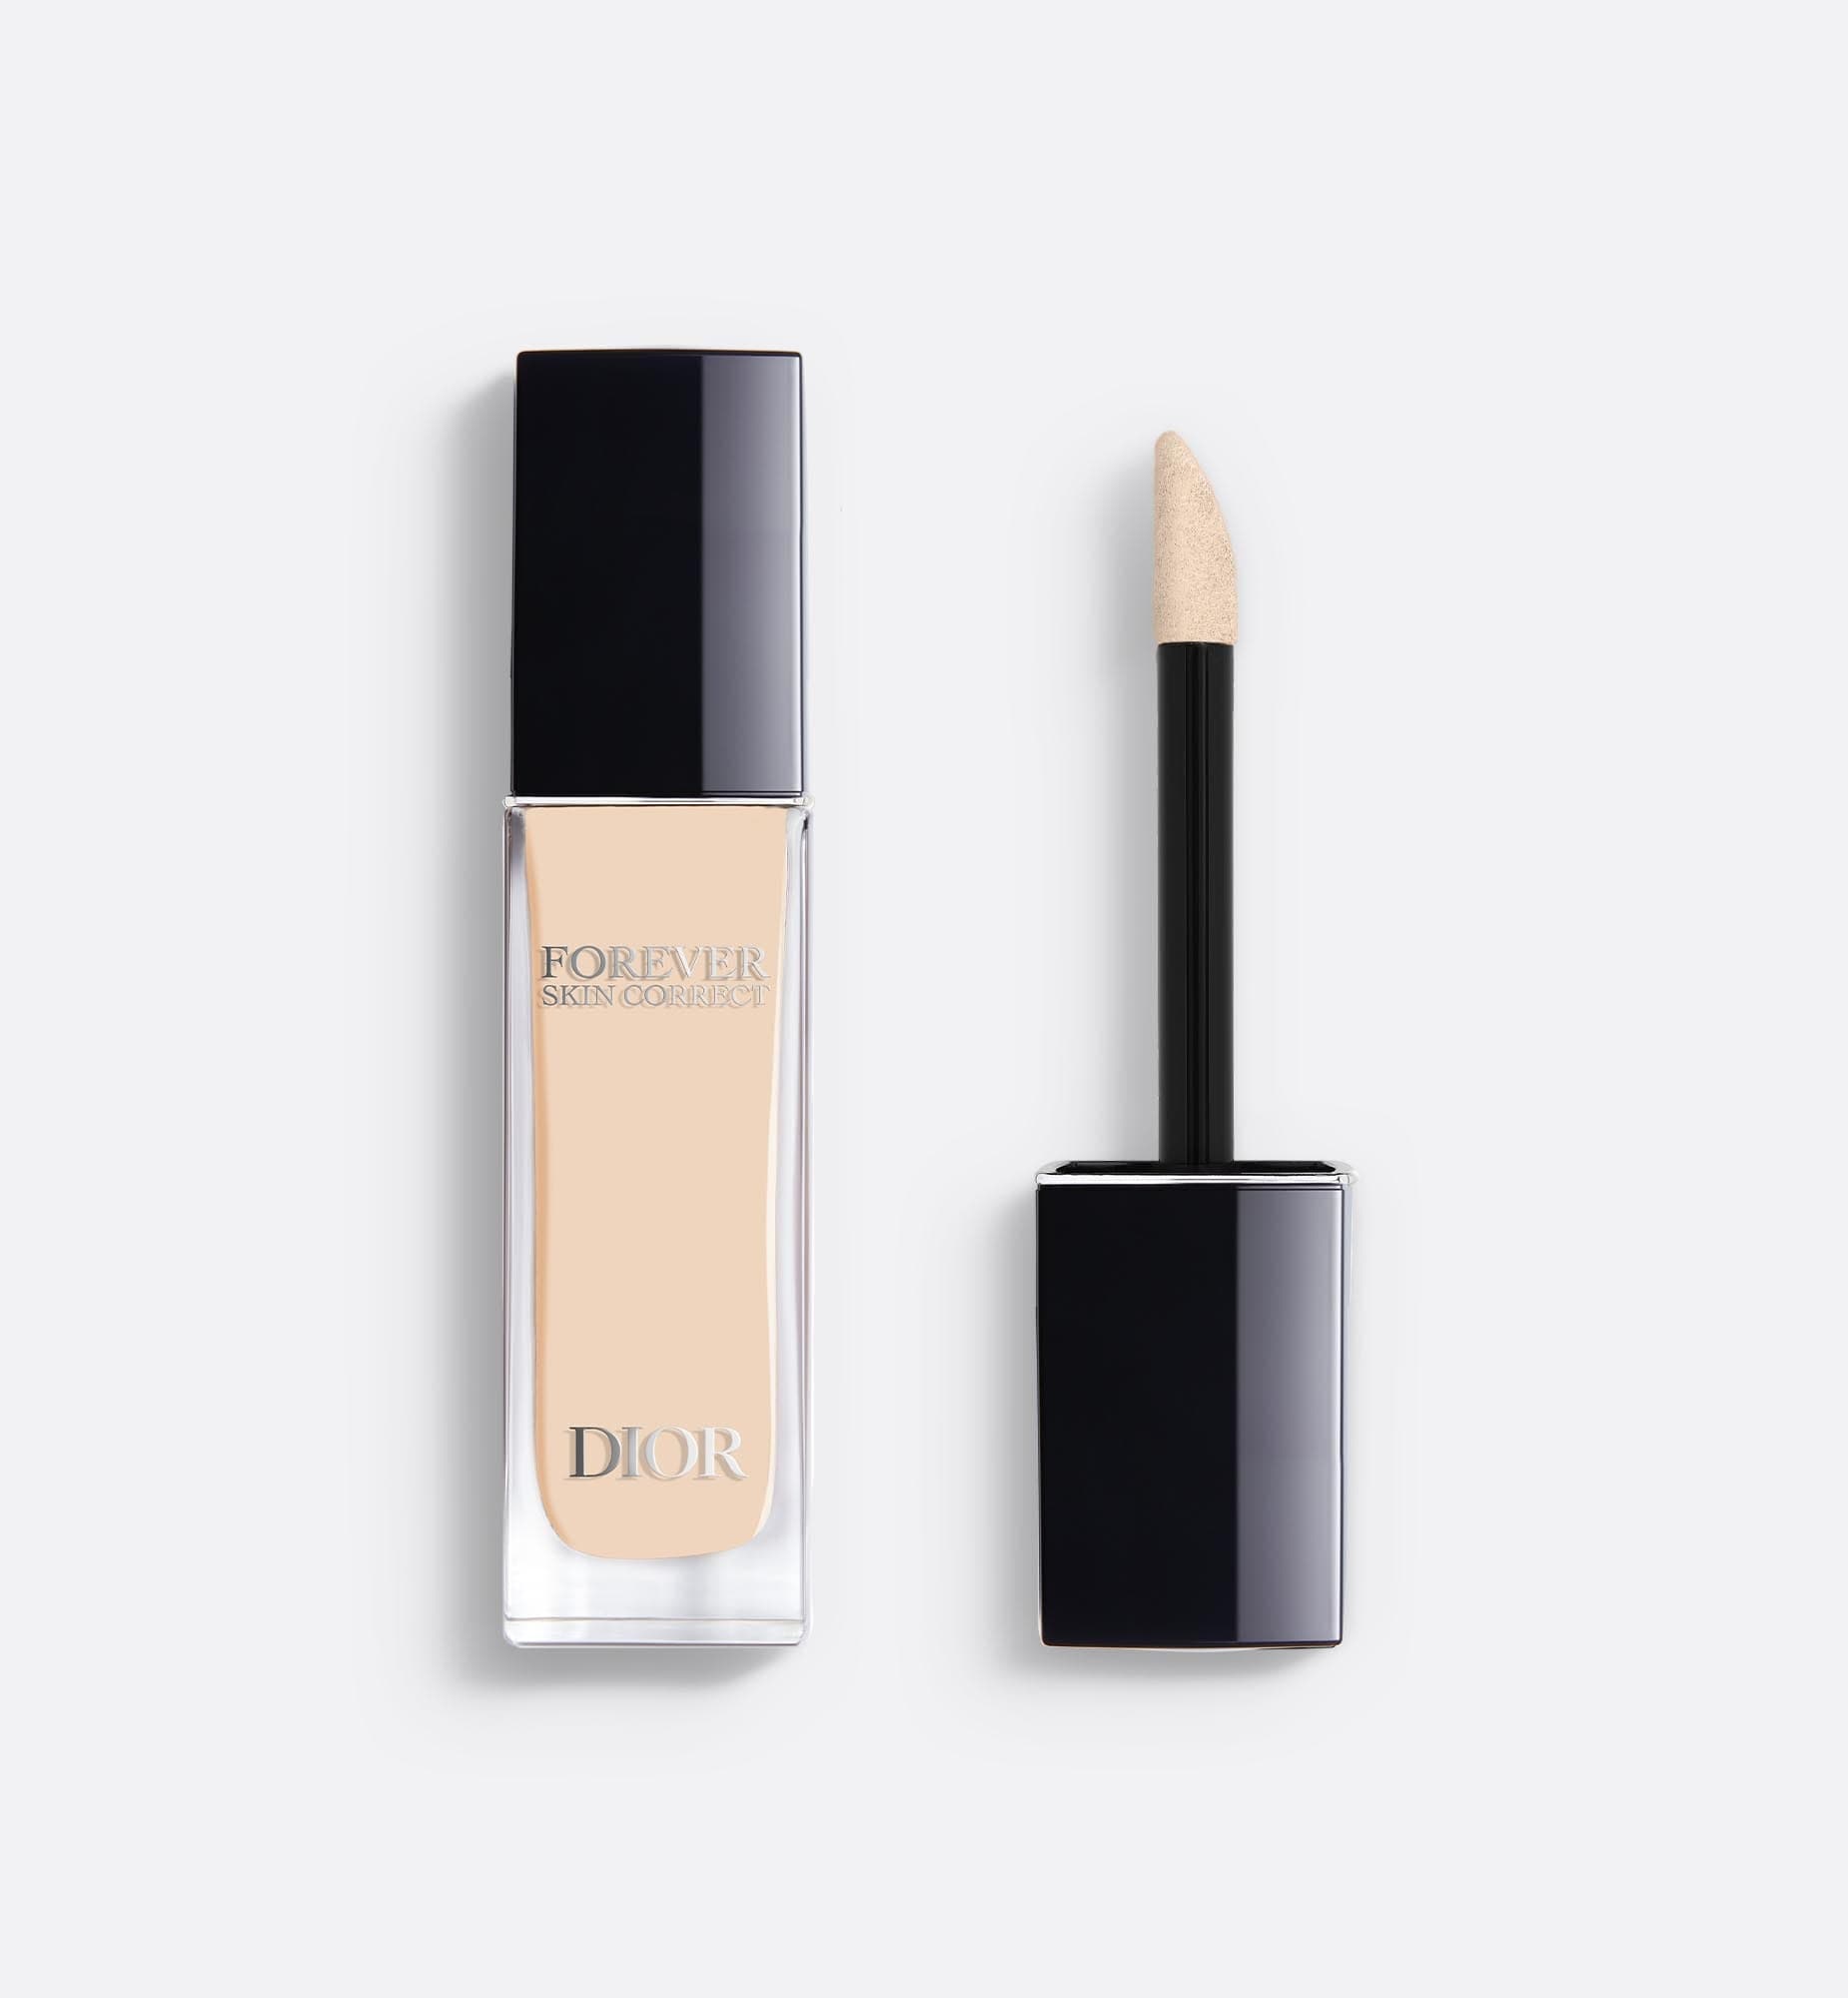 Dior Forever Skin Correct | Clean Creamy Color Corrector - 24h Hydration and Wear - No Transfer